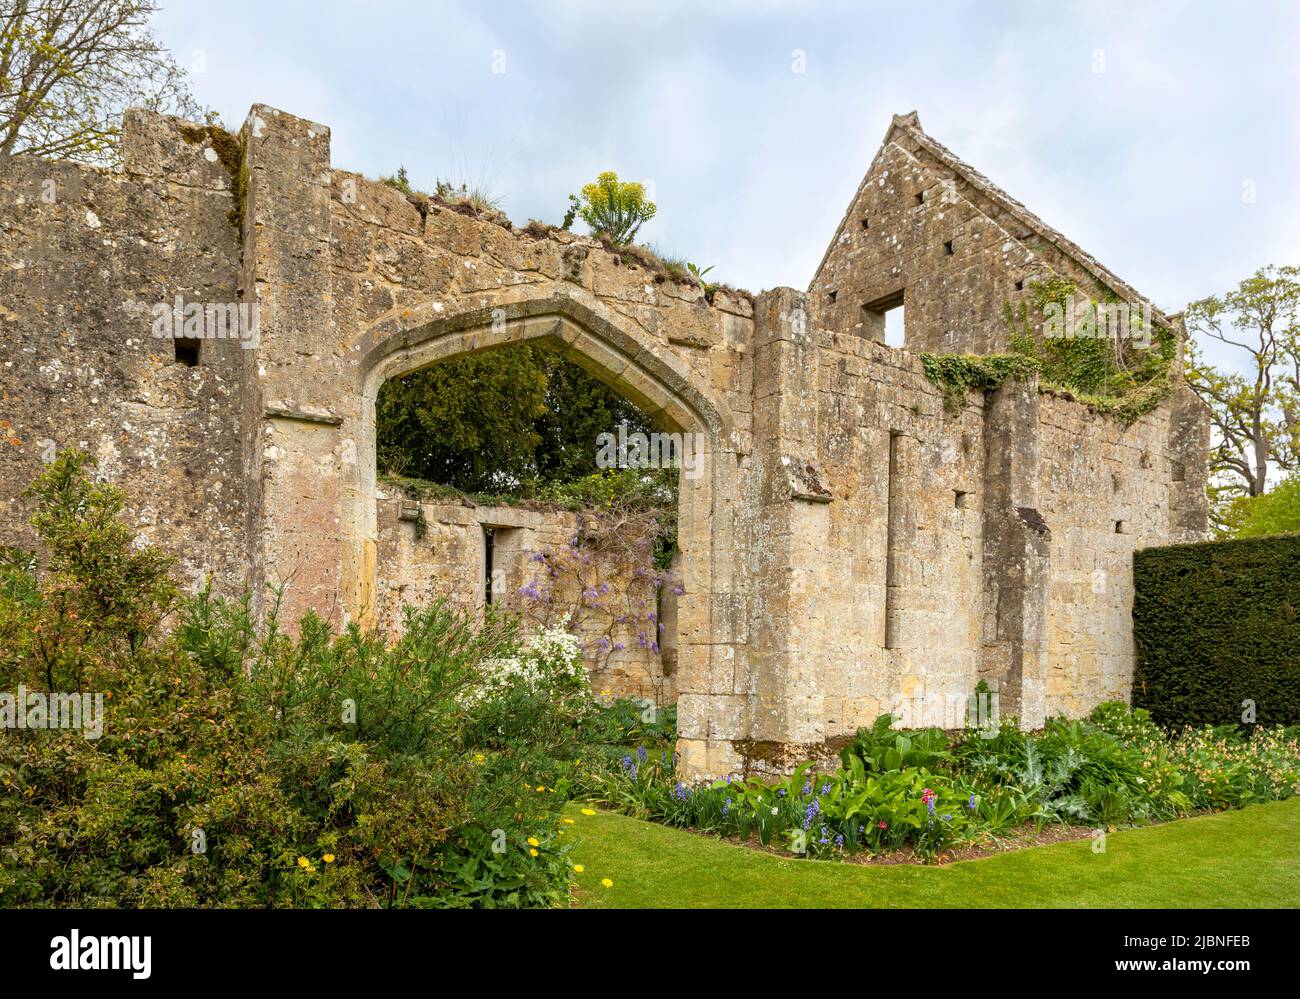 The ruins of the 15th-century tithe barn in the grounds of Castle, Sudeley, Gloucestershire, Cotswolds, England, Great Britain, UK. Stock Photo